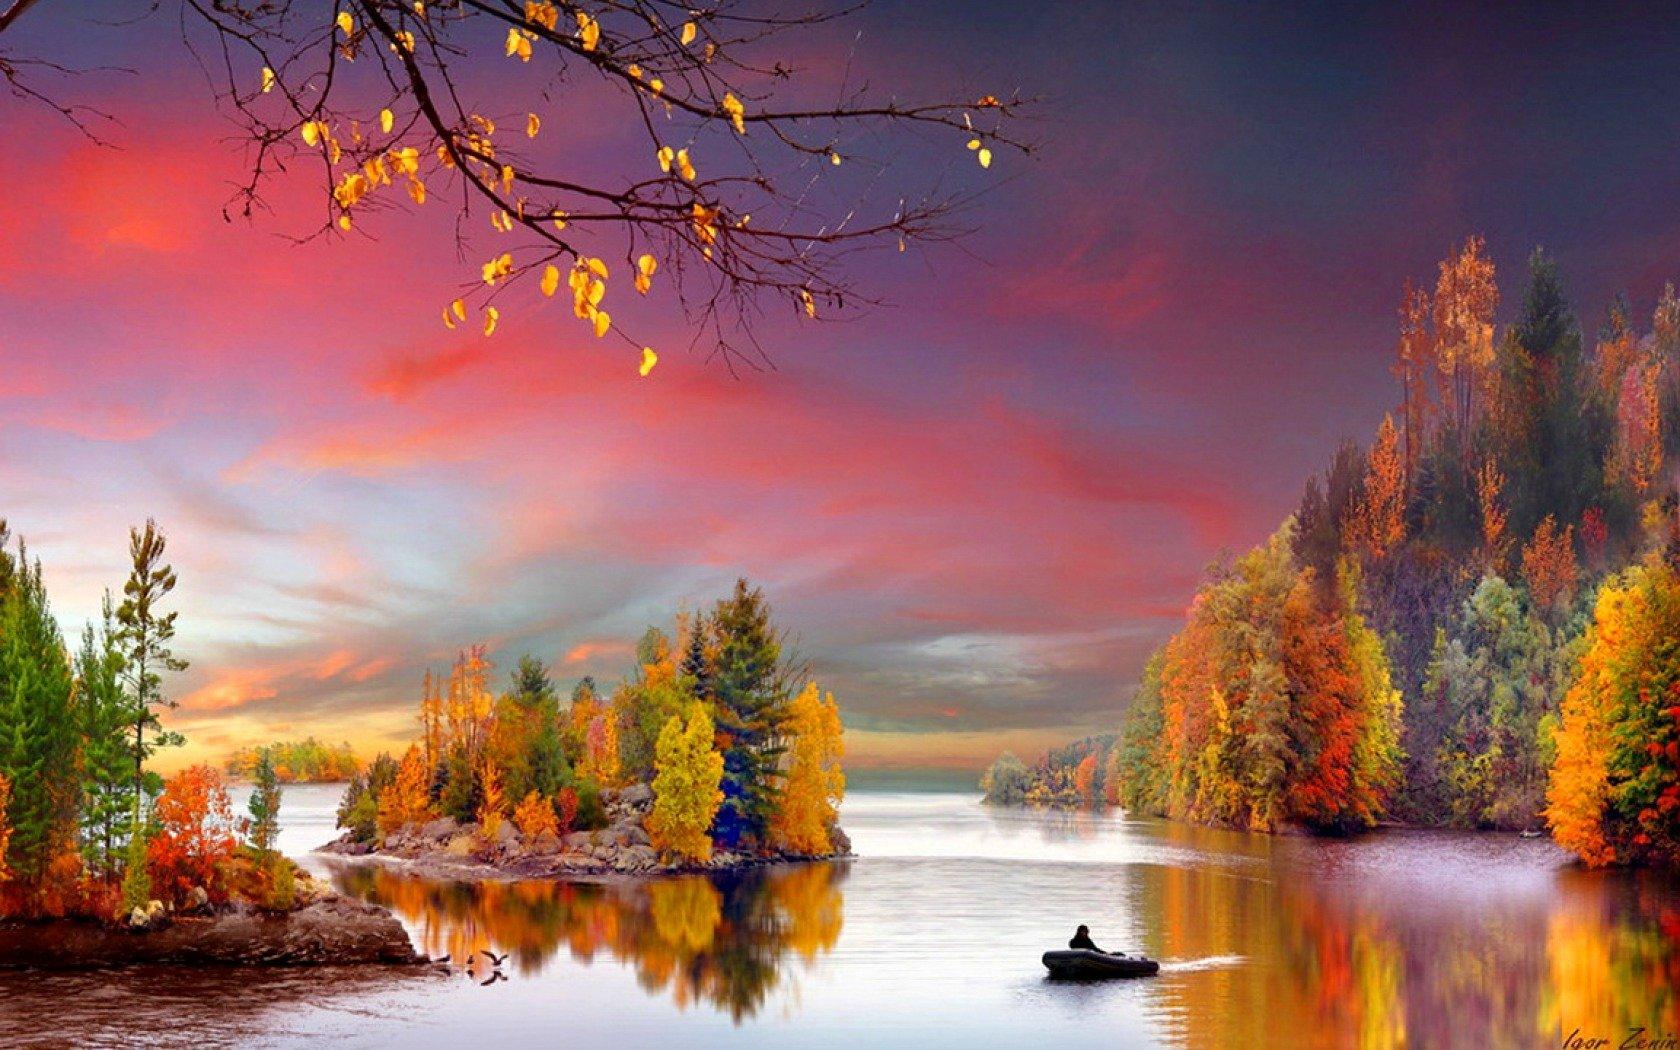 Boat on Autumn Lake Wallpaper and Background Imagex1050